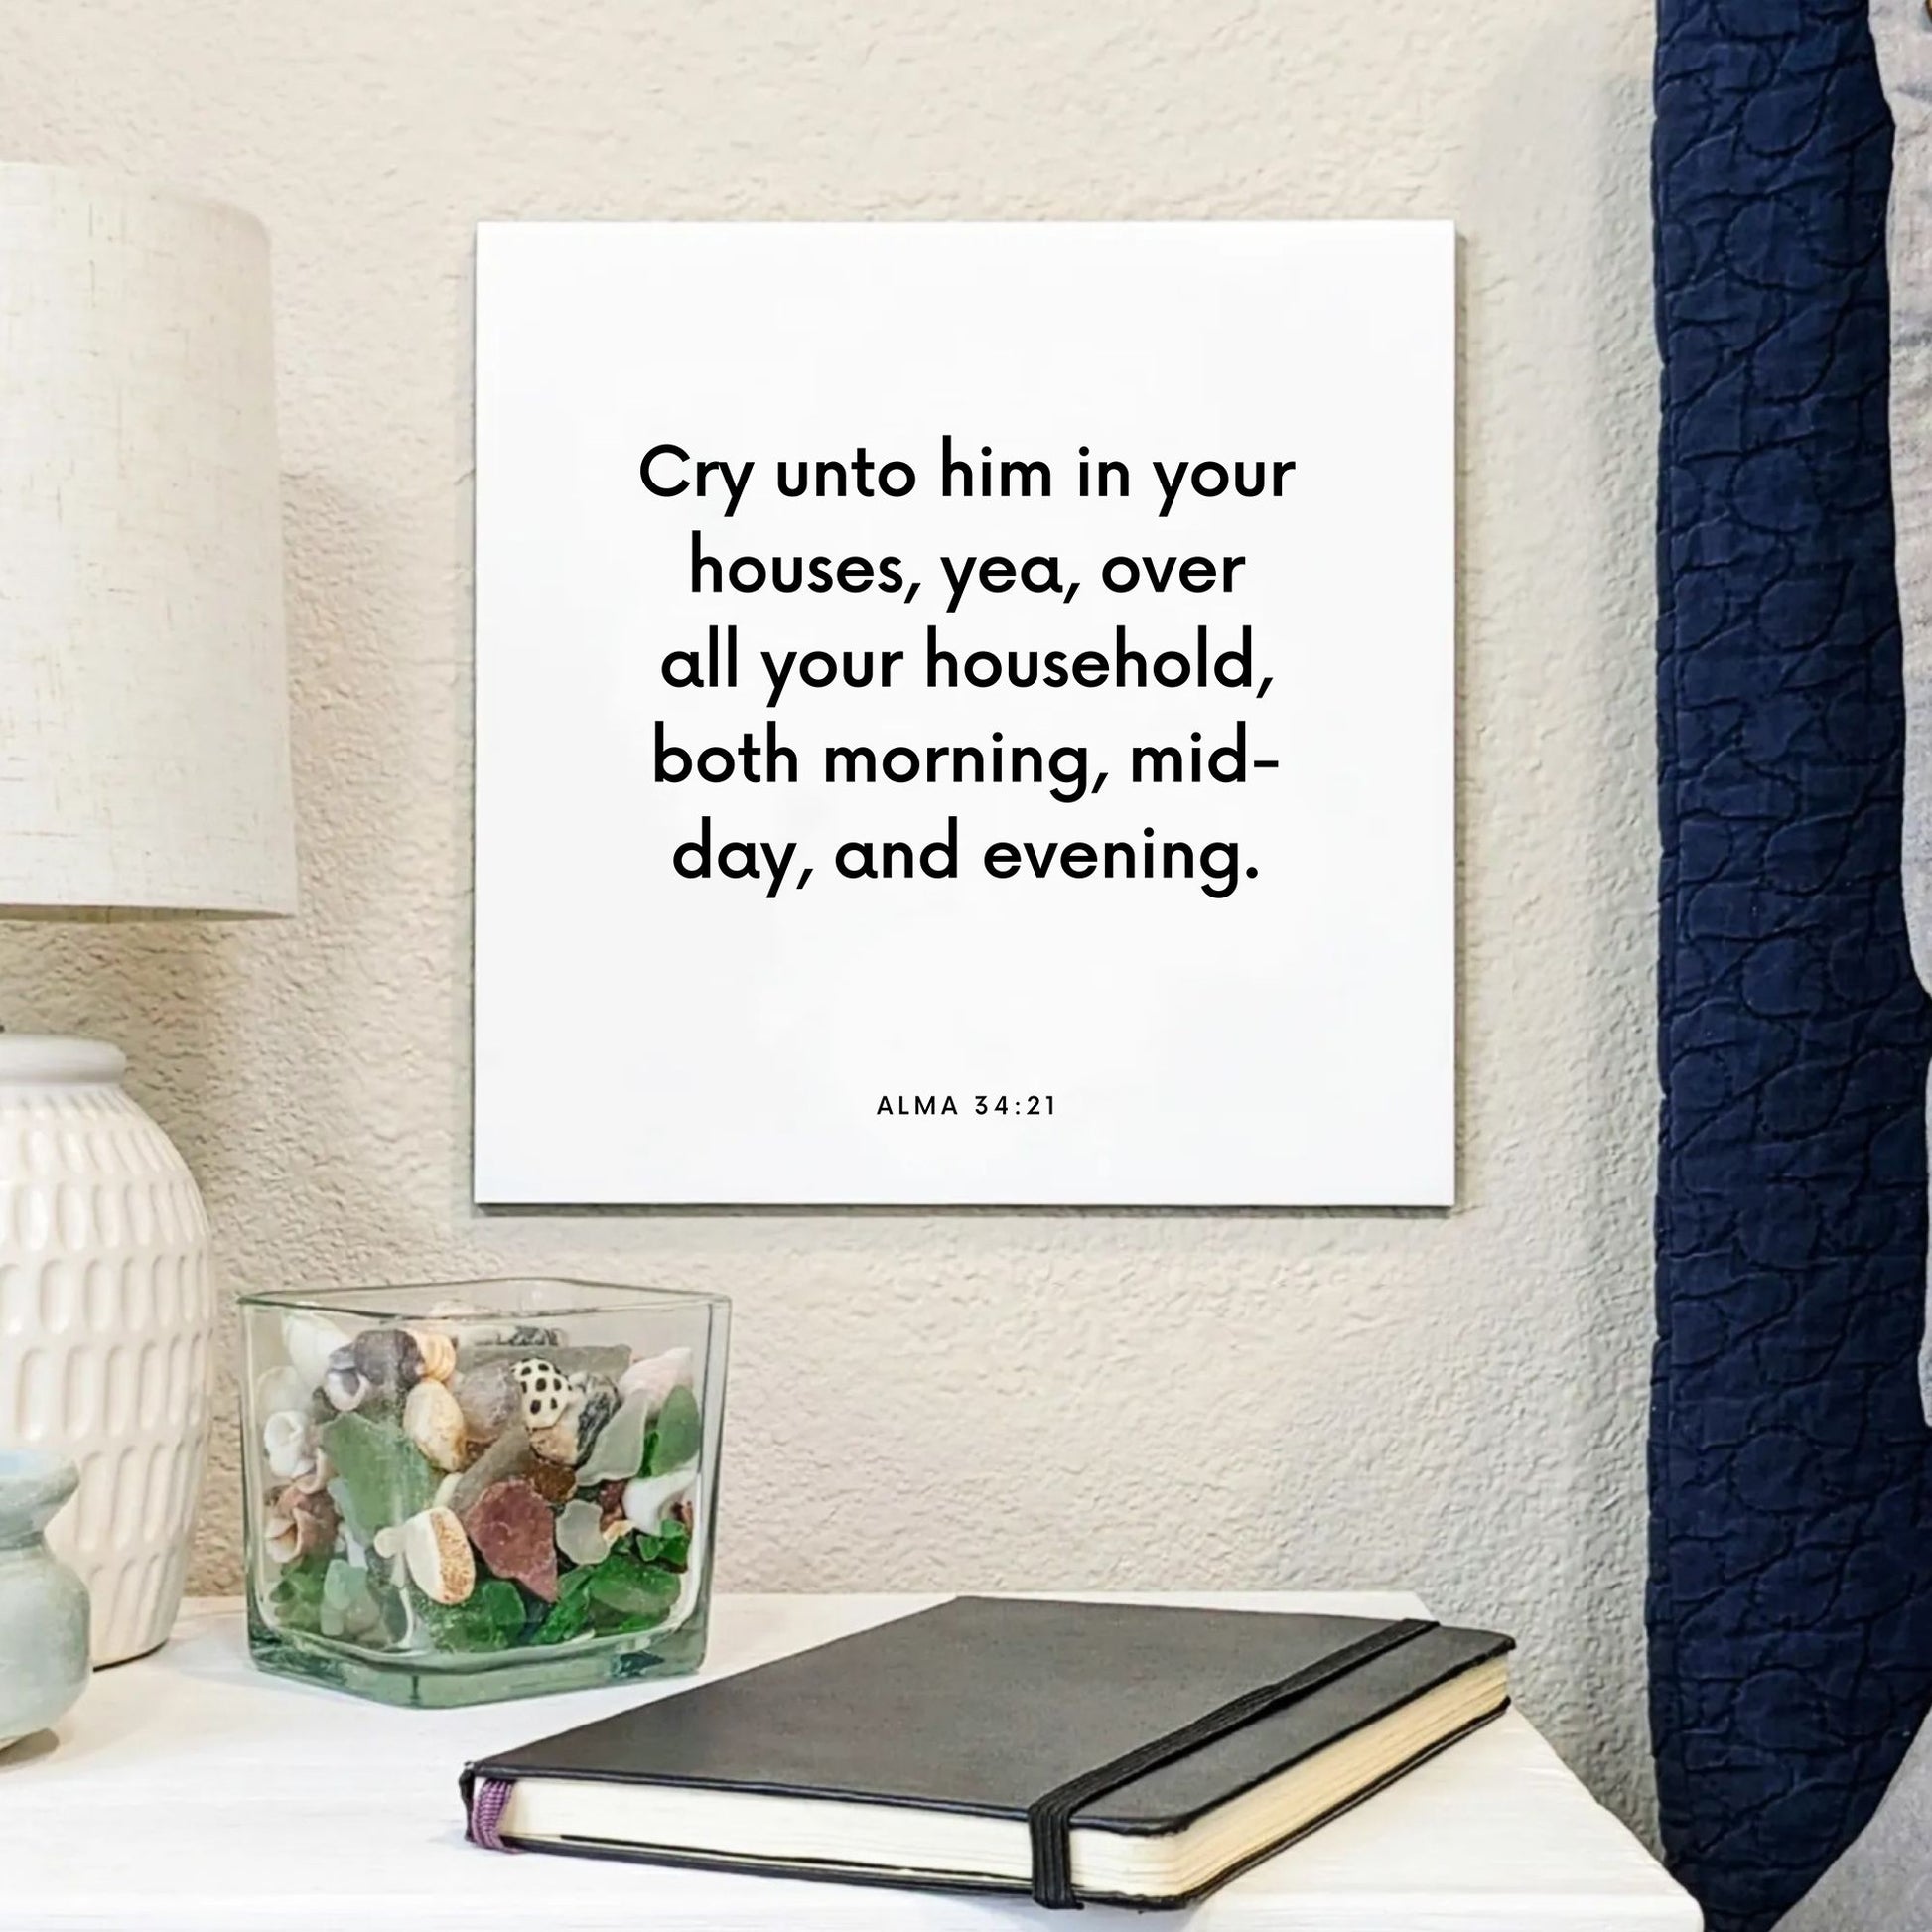 Bedside mouting of the scripture tile for Alma 34:21 - "Cry unto him in your houses, yea, over all your household"